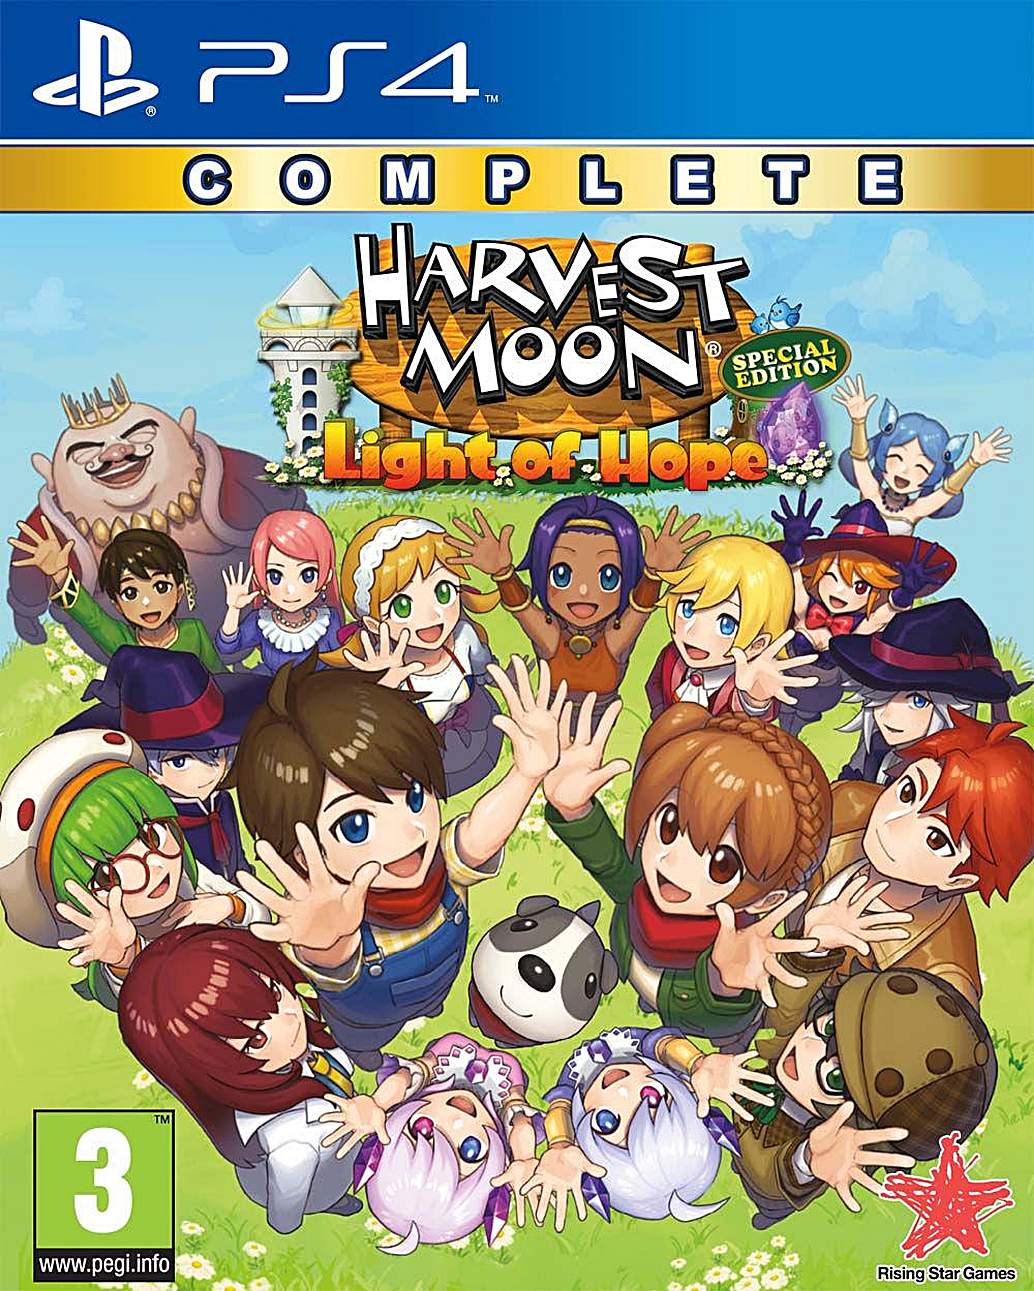 Harvest Moon - Light of Hope - Complete - Special Edition von Natsume